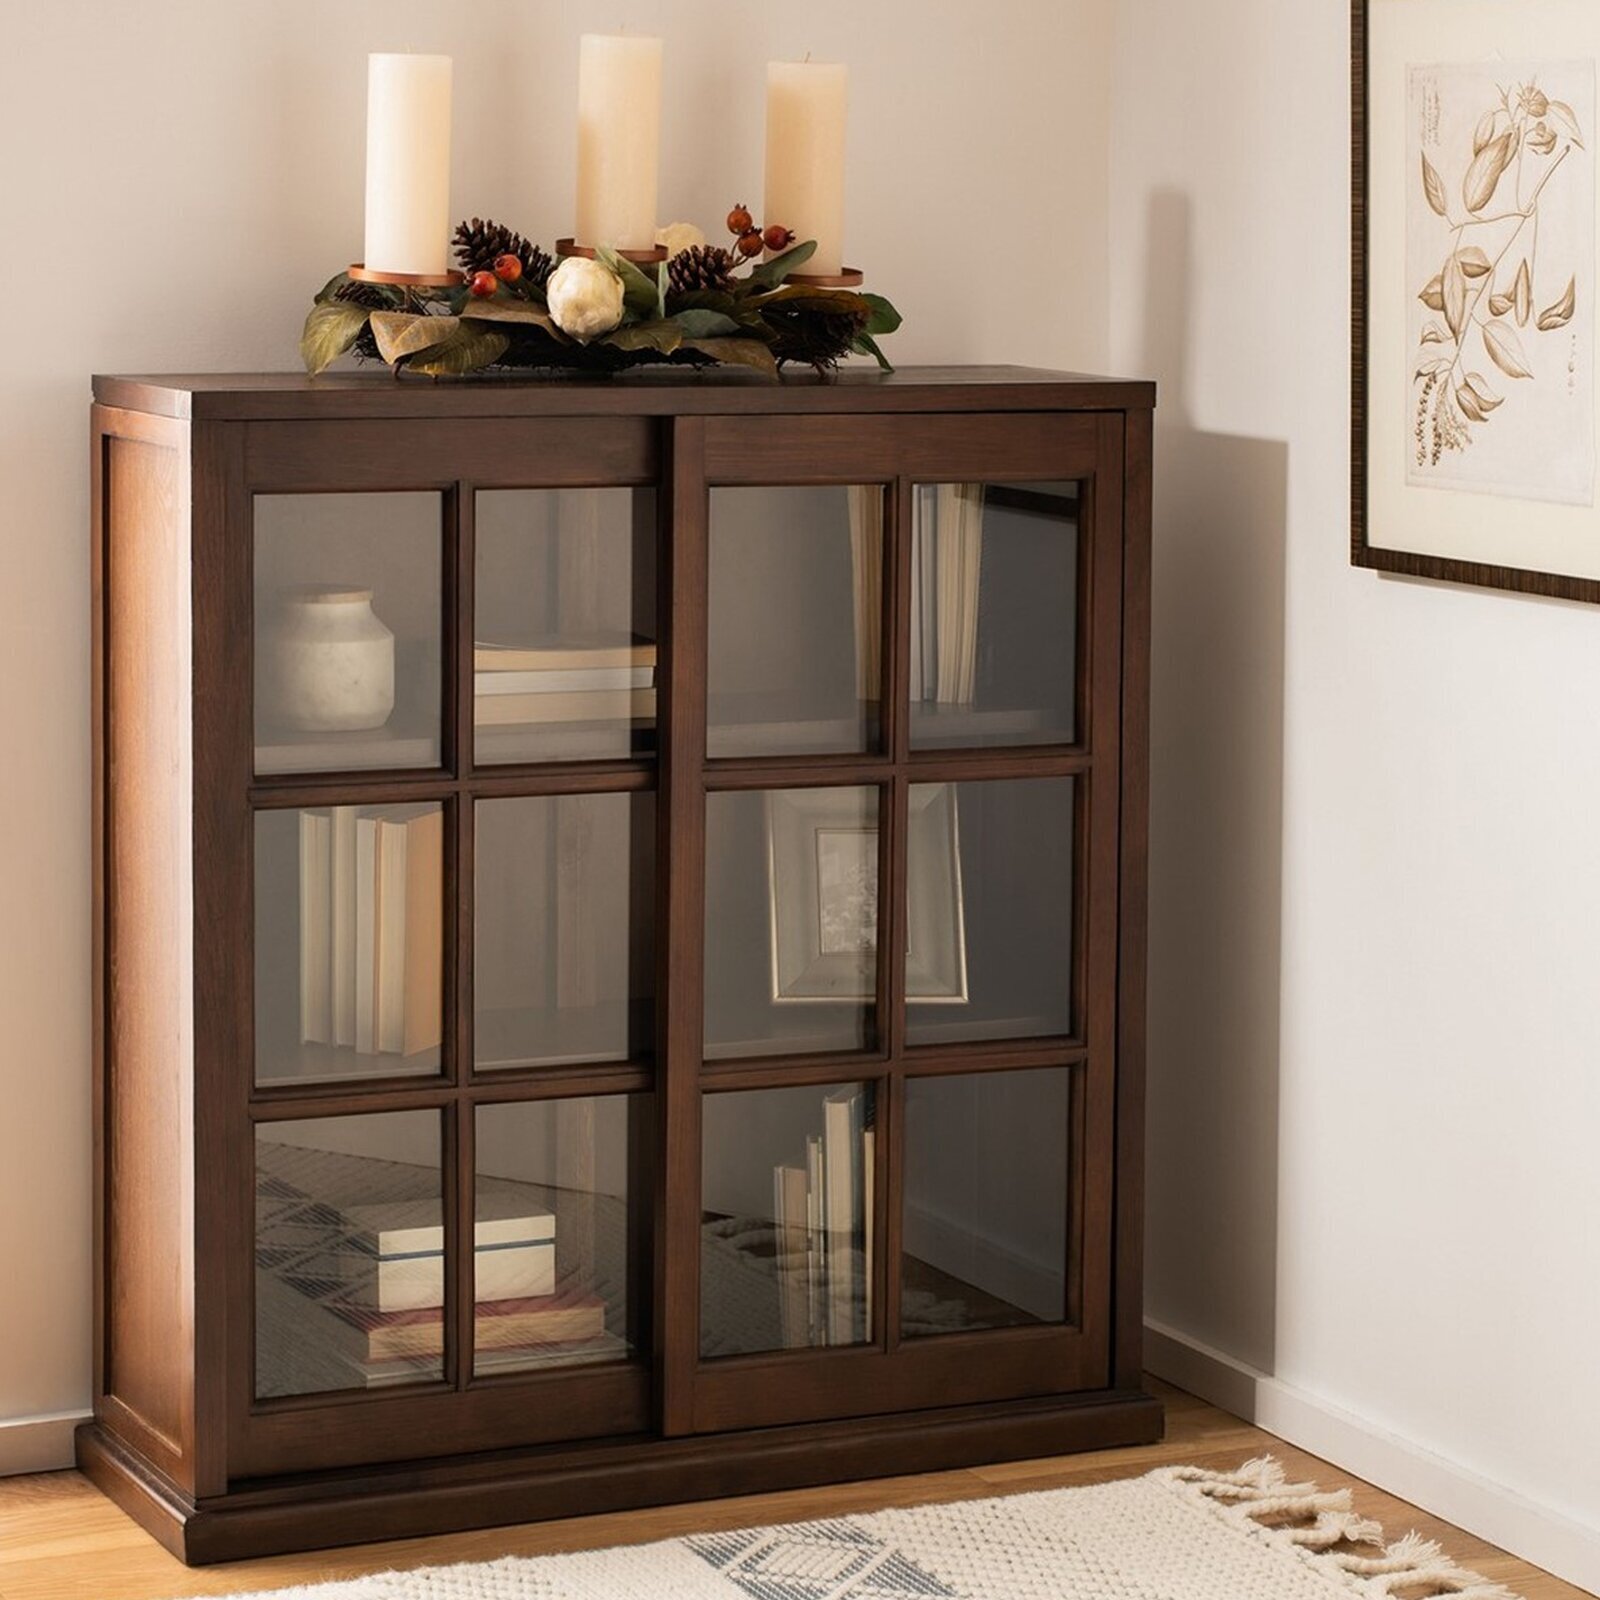 Wooden Bookcase With Bypass Doors